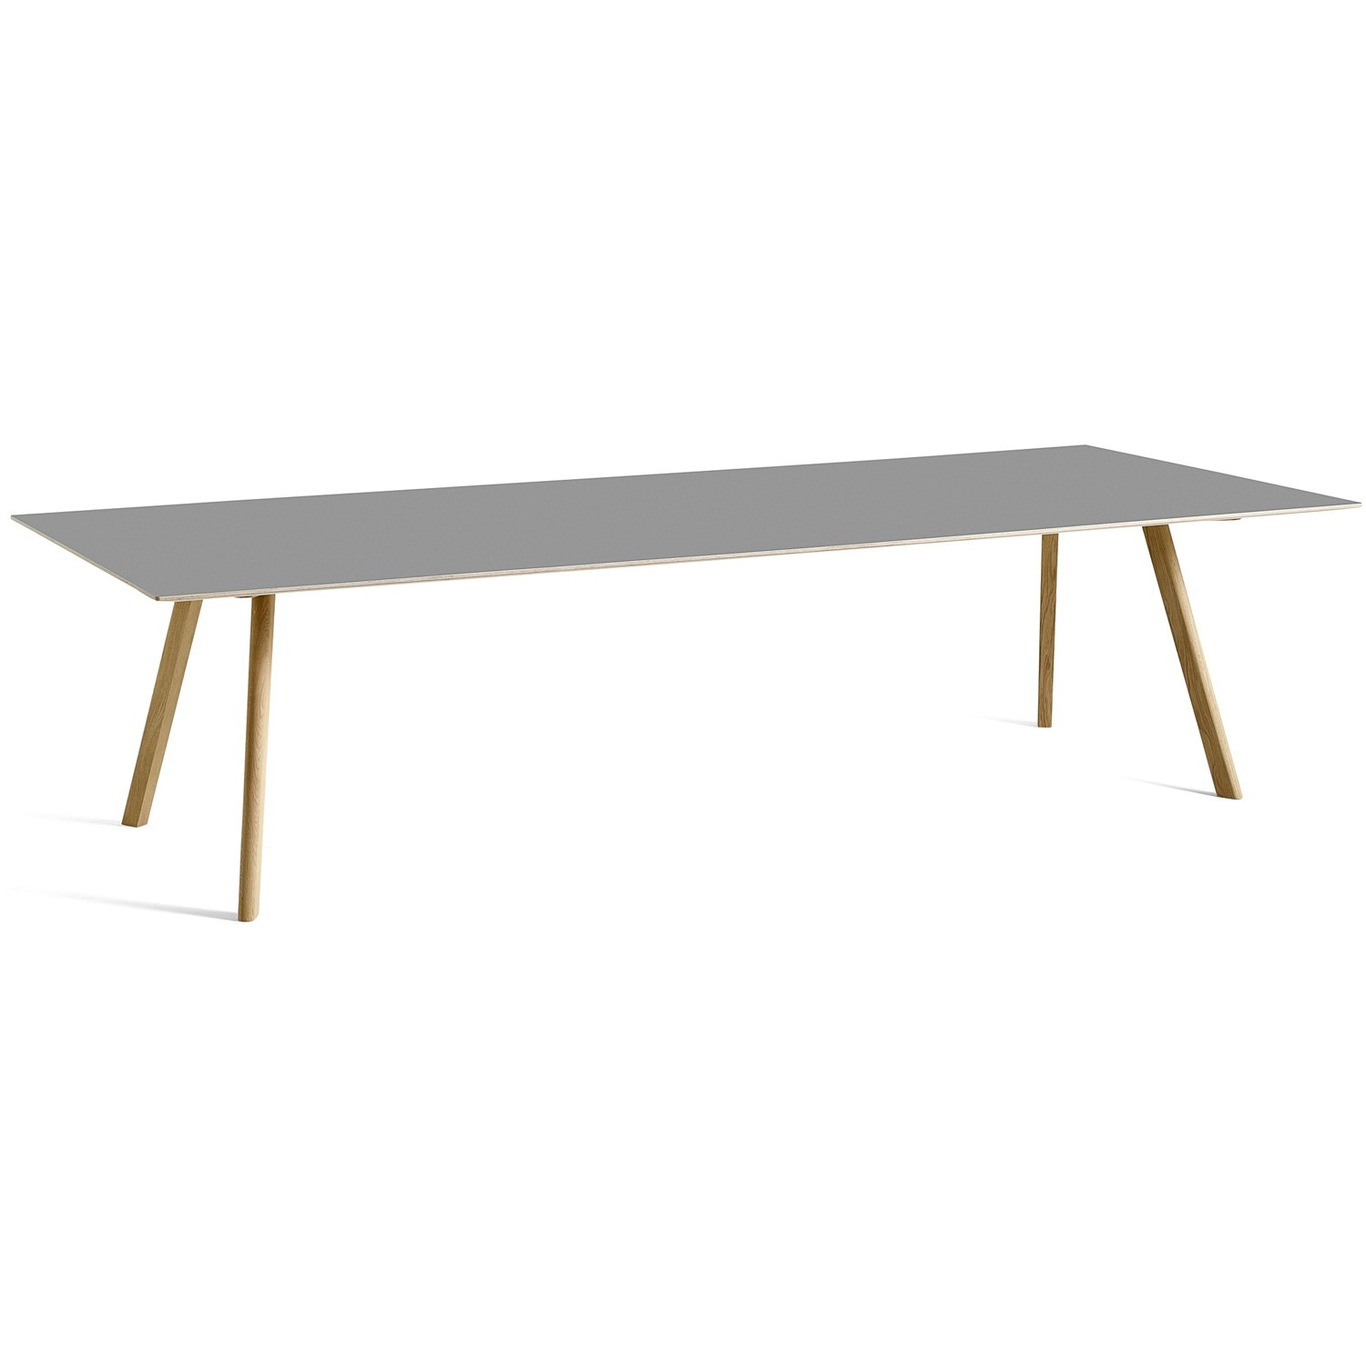 CPH 30 Table 300x120 cm, Water-based Lacquered Oak / Grey Linoleum